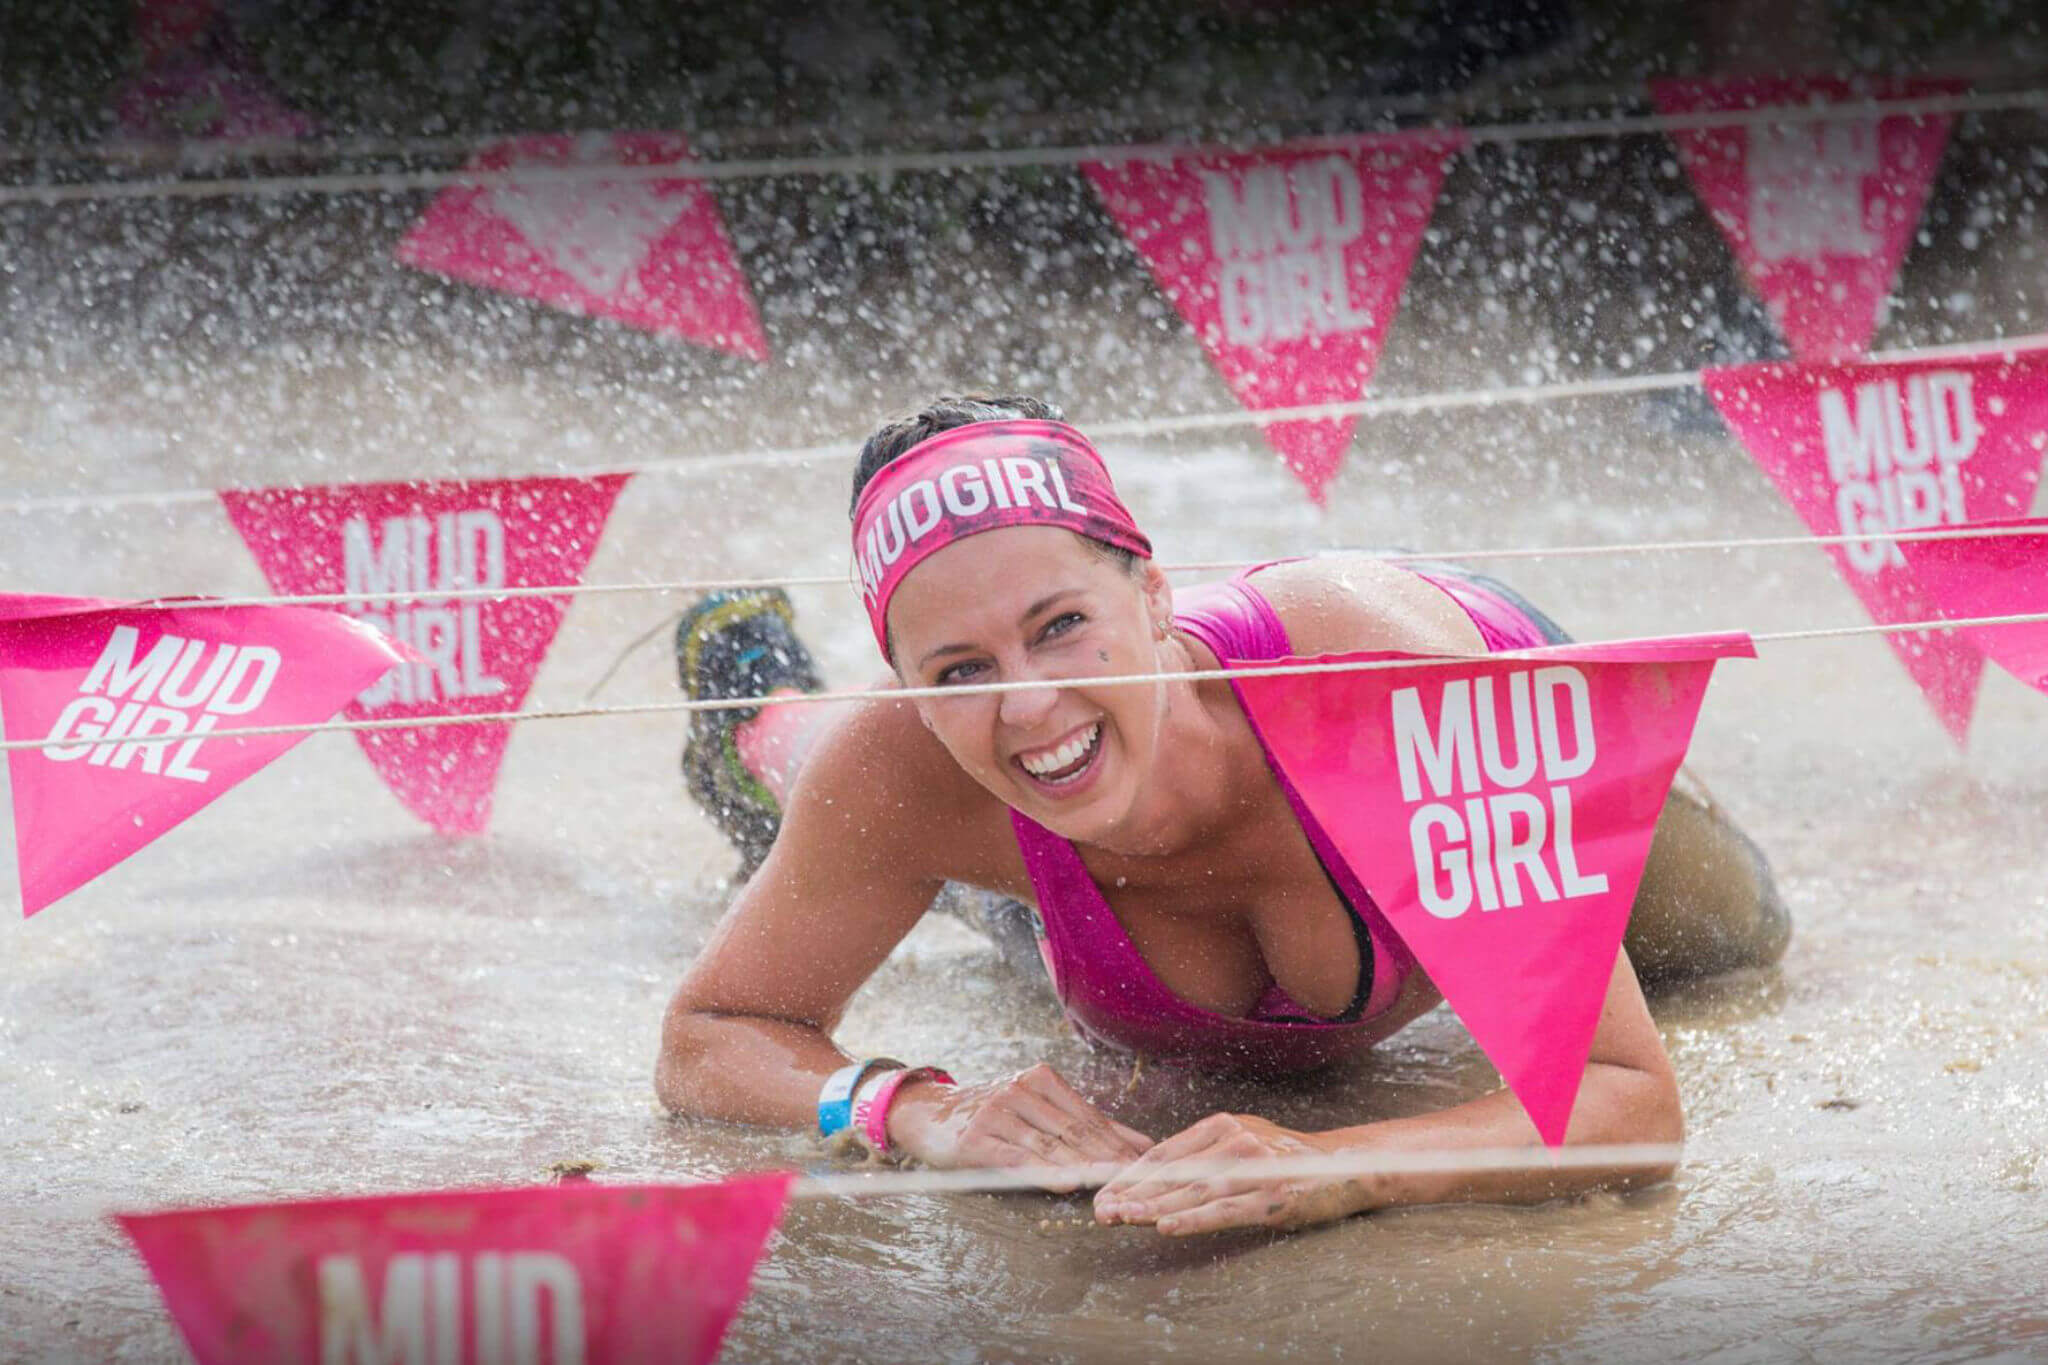 MudGirl 2021 Experience - Featured Image - Outdoor Media Works